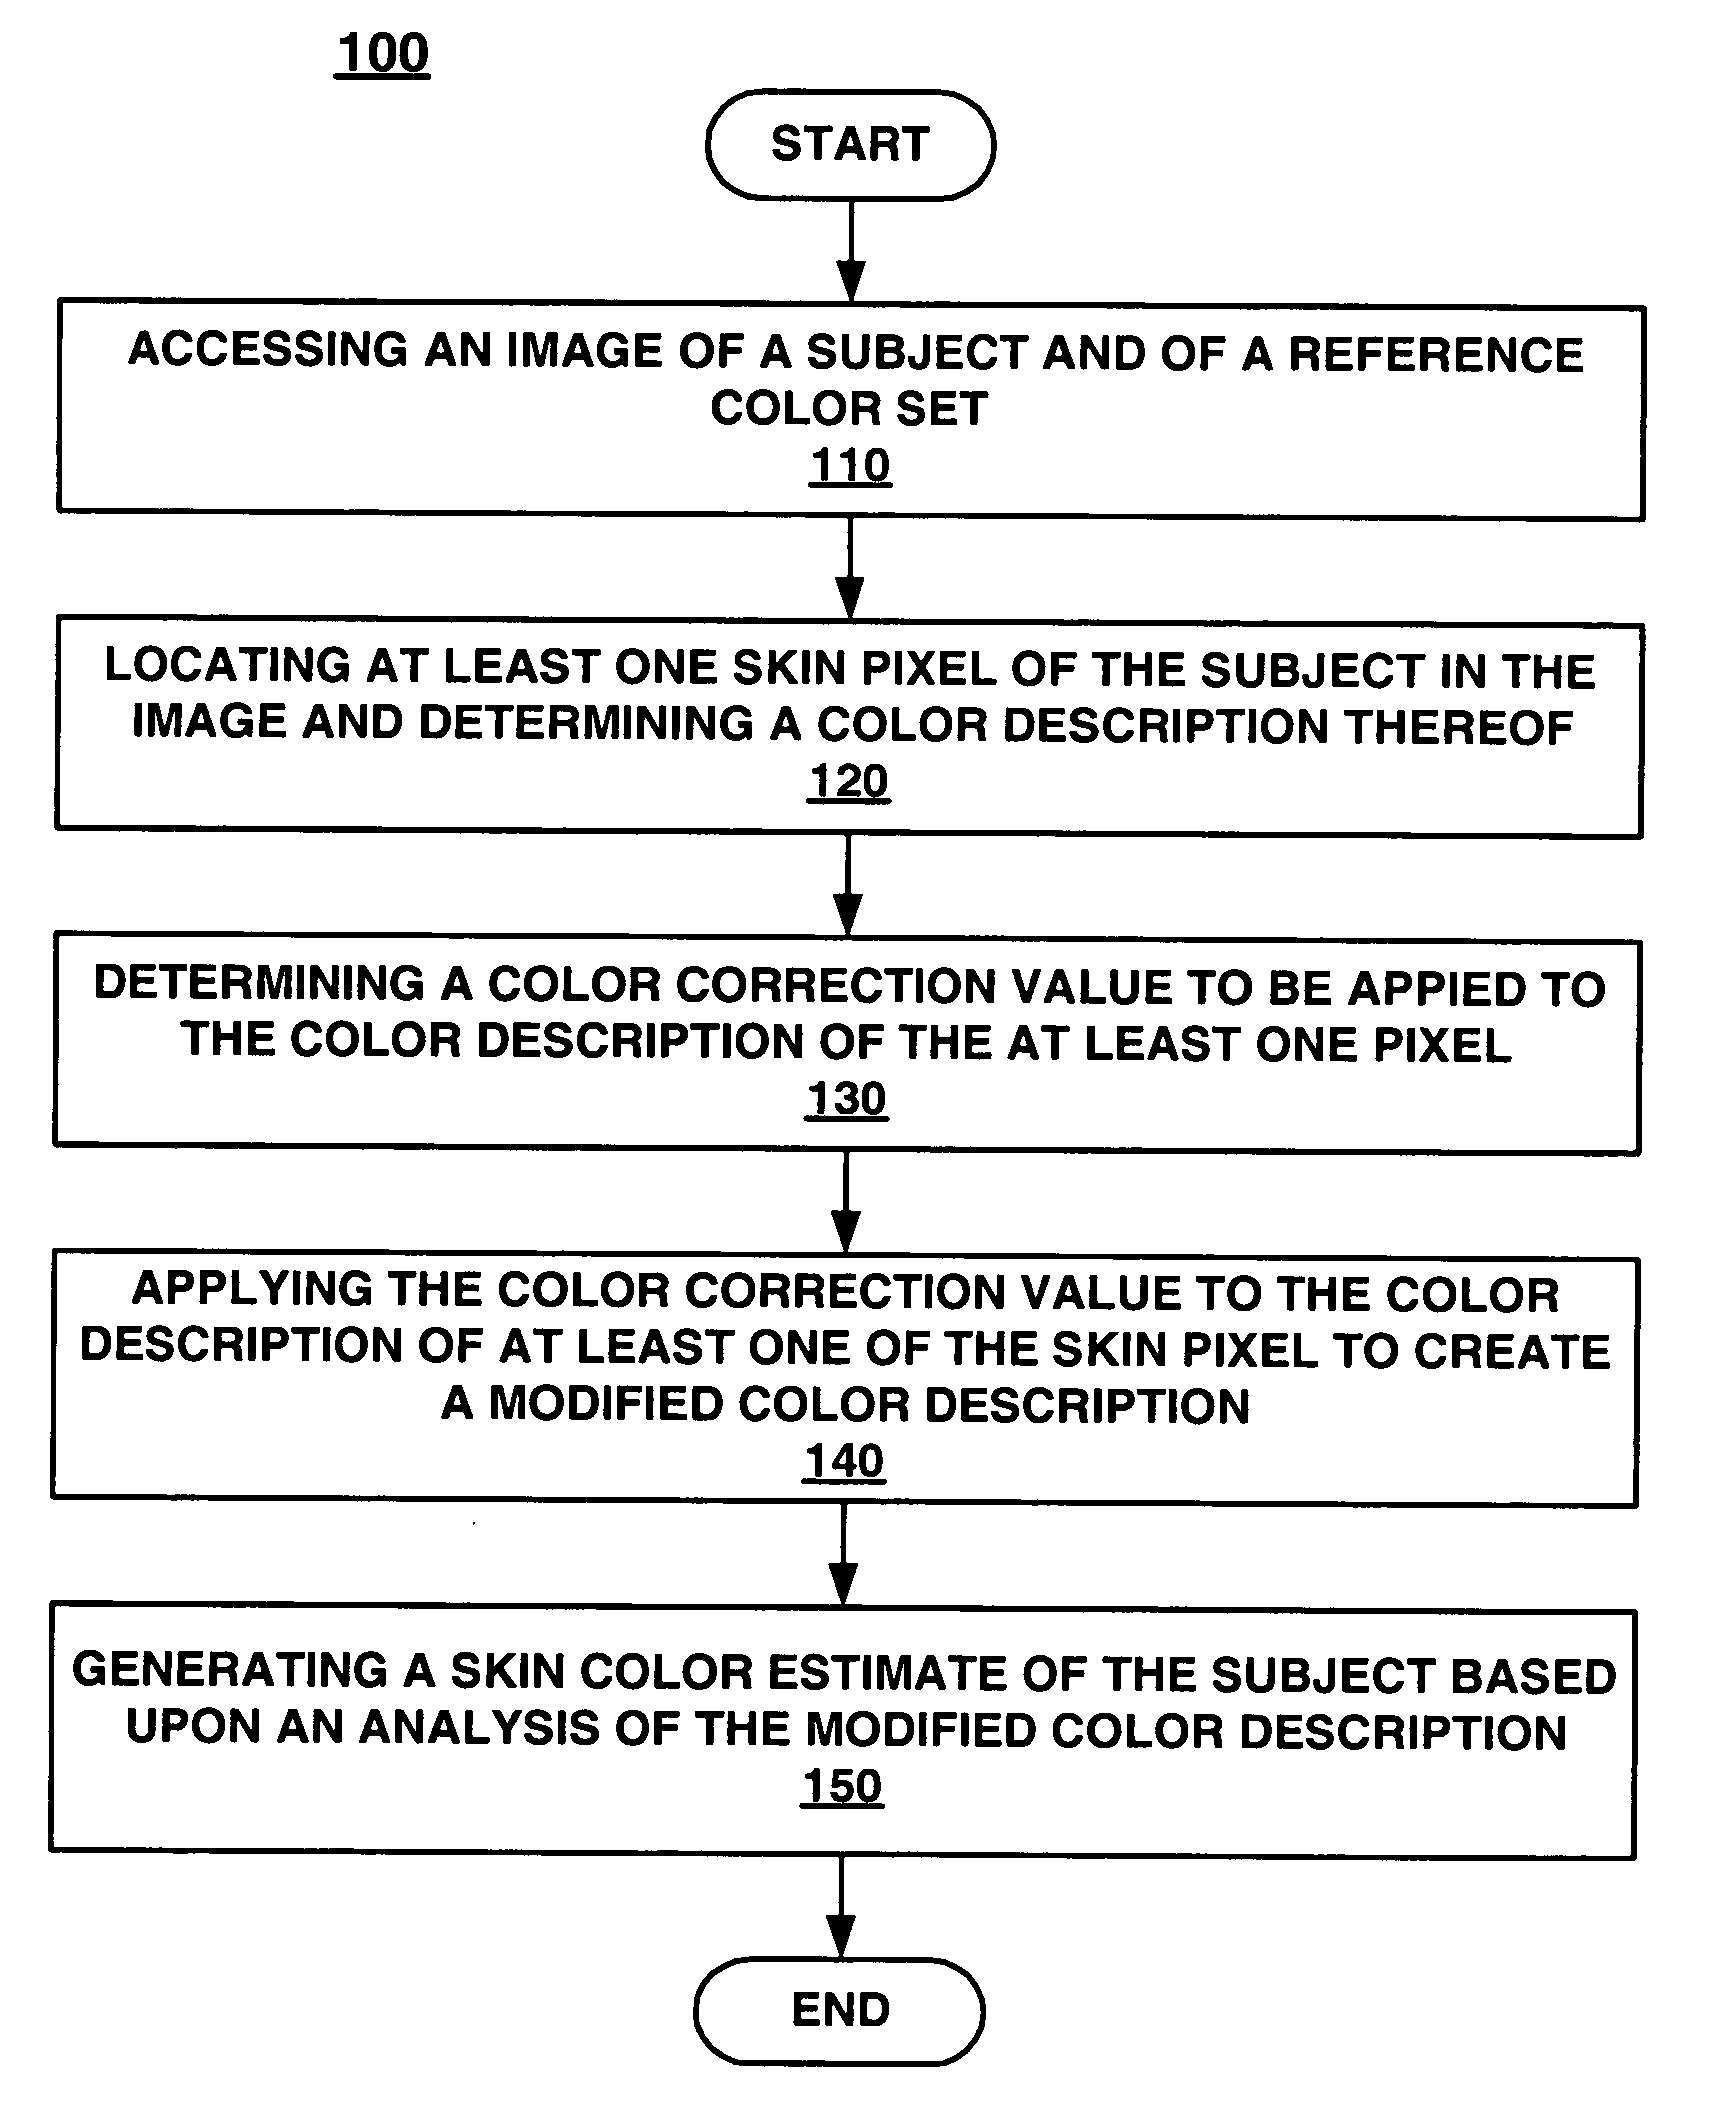 Method and system for skin color estimation from an image